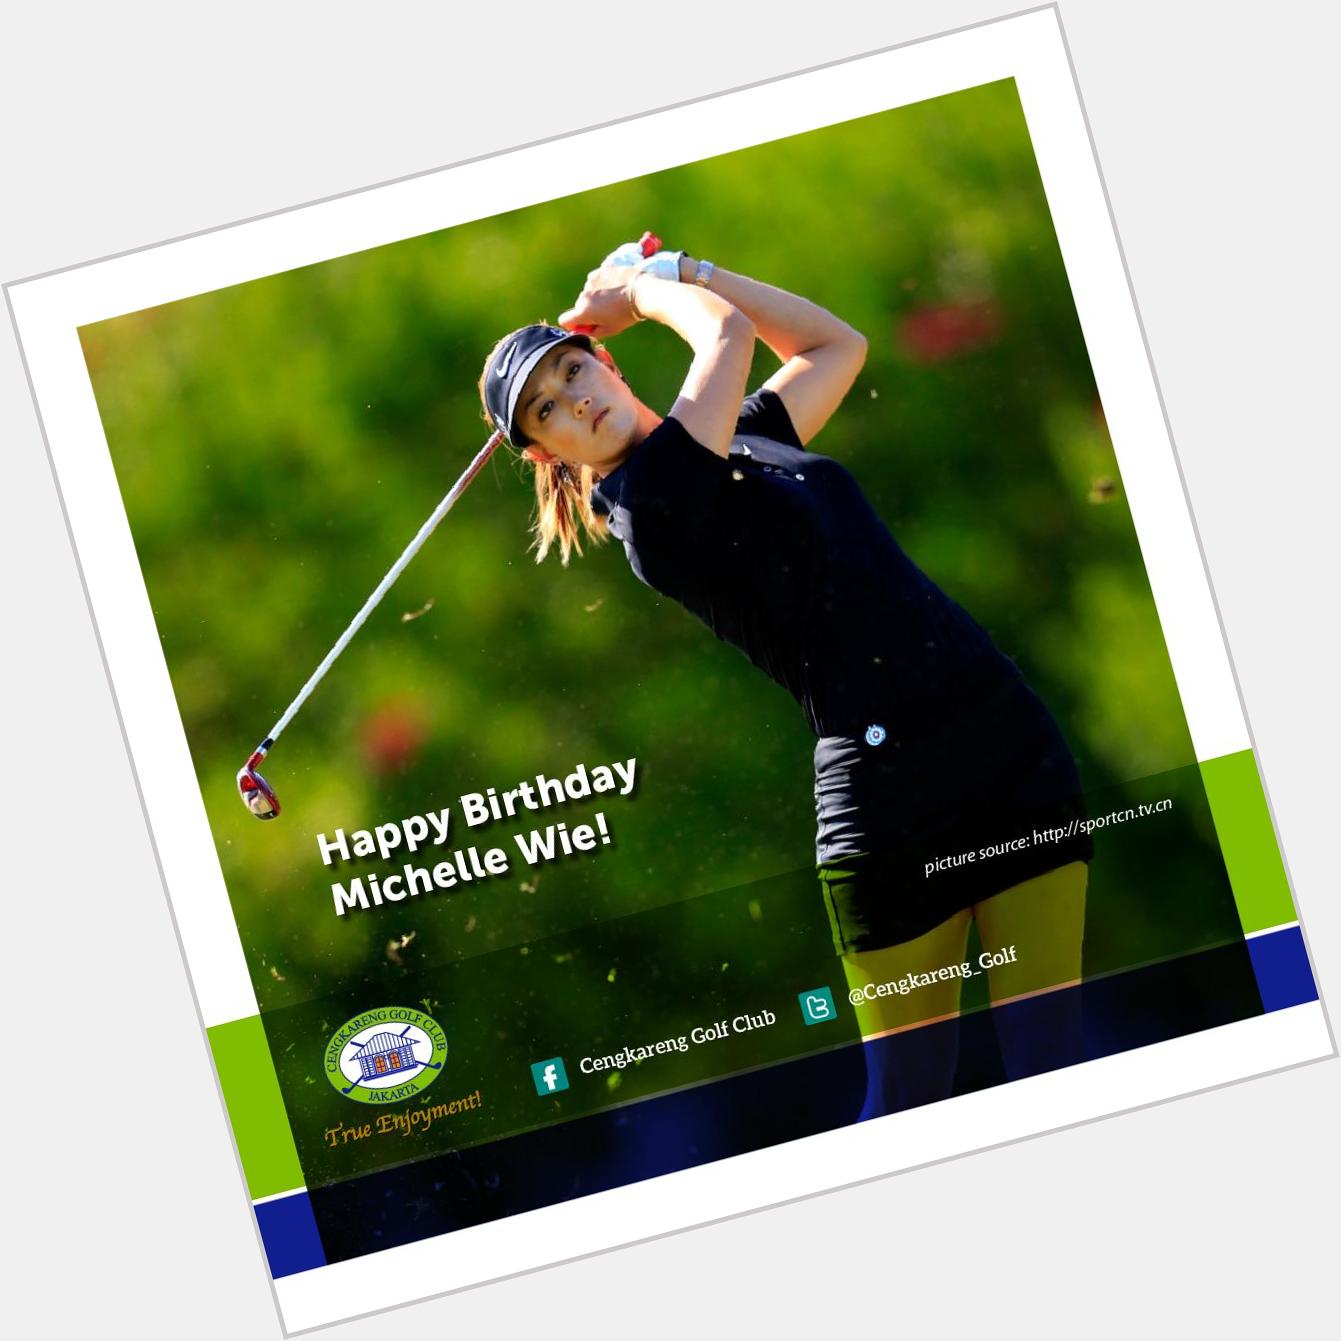 One of the most popular female golfers celebrates her 26th birthday today! Happy birthday Michelle Wie! 